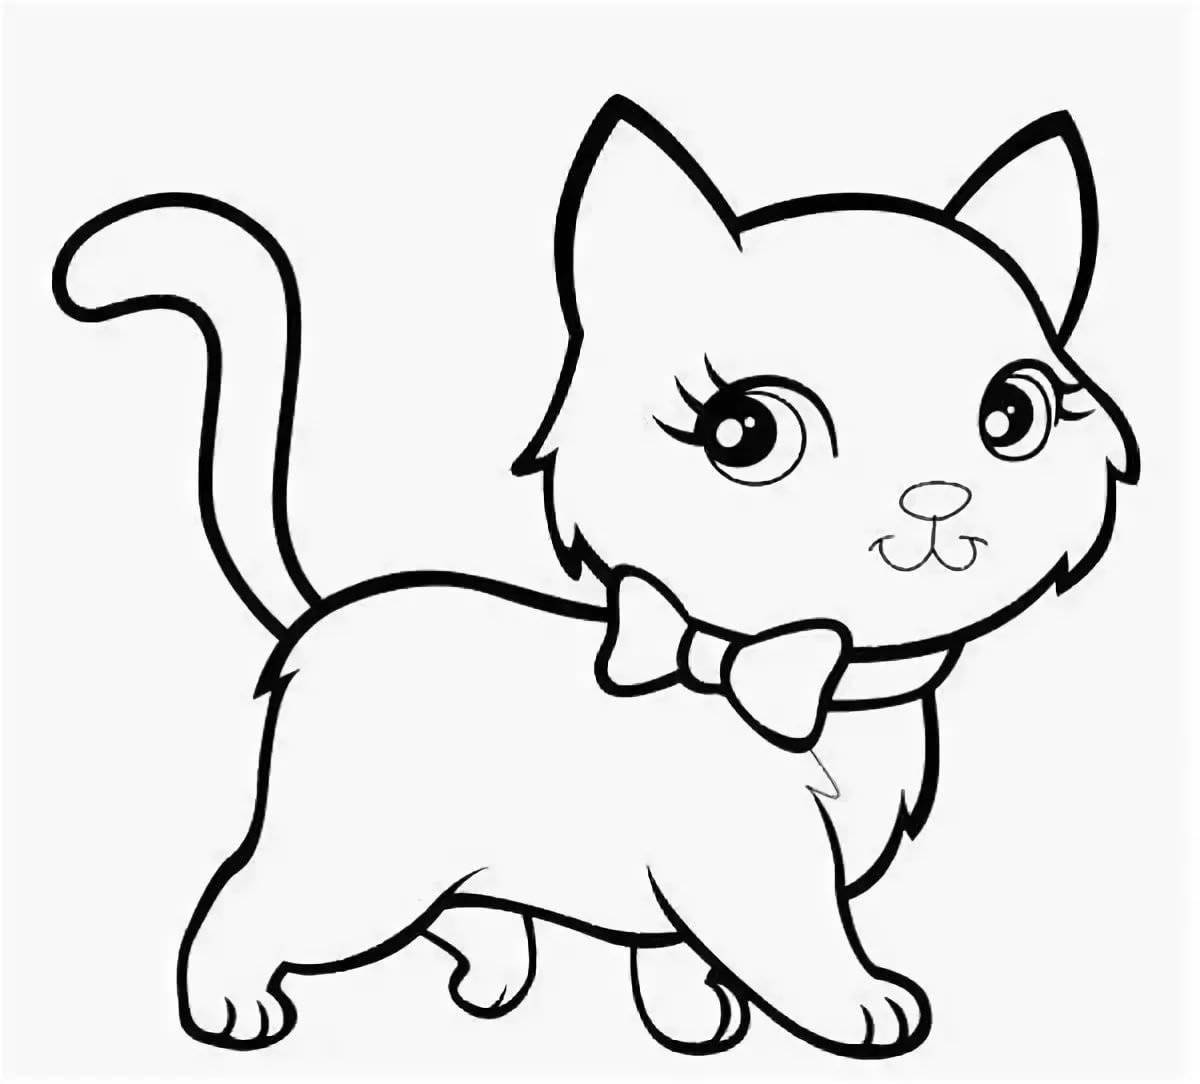 Live coloring cat for children 4-5 years old